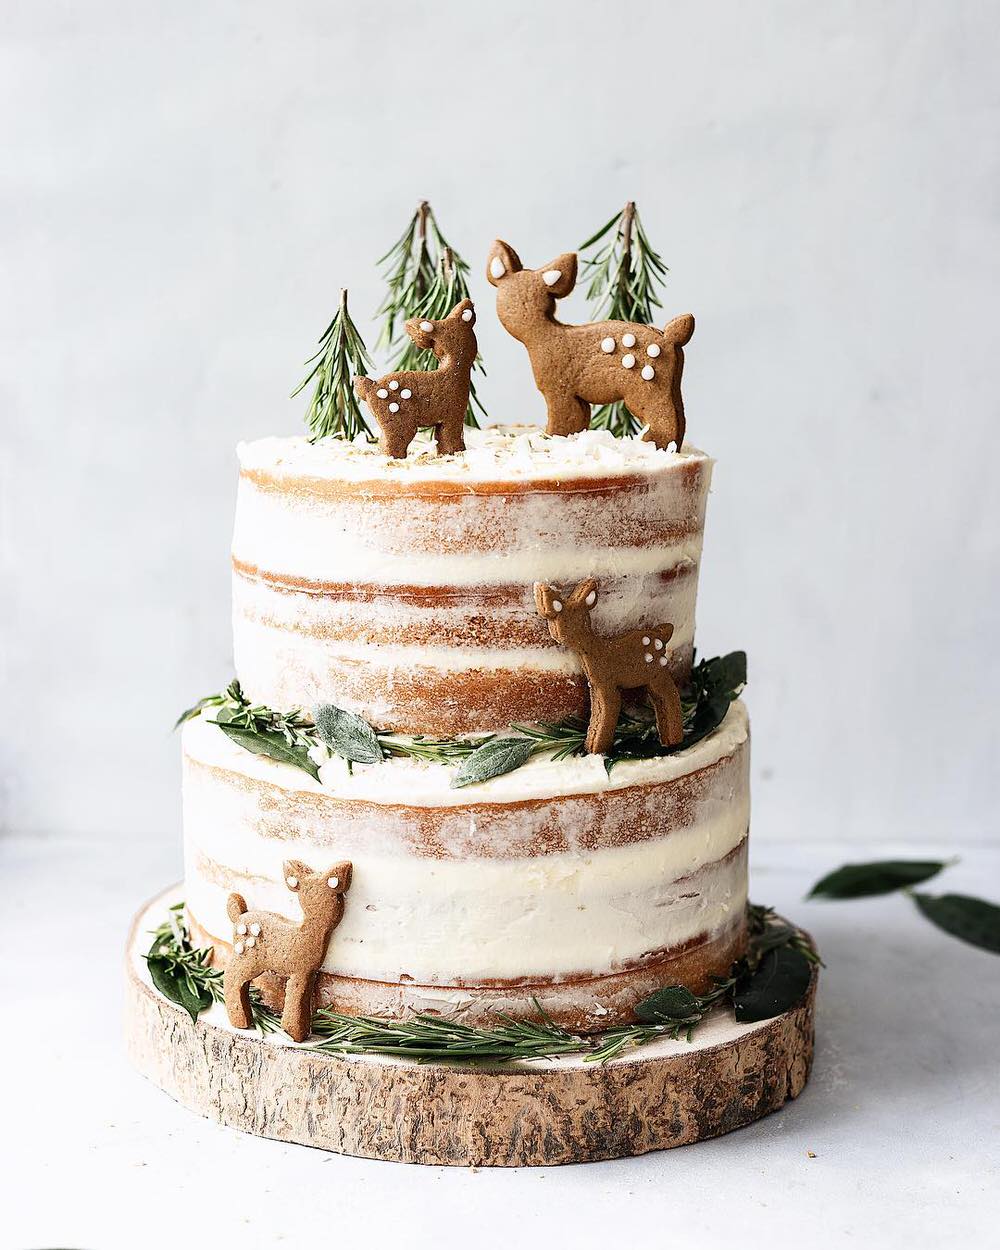 Winter Wedding Cakes: 30 Mouth-Watering Ideas - hitched.co.uk -  hitched.co.uk